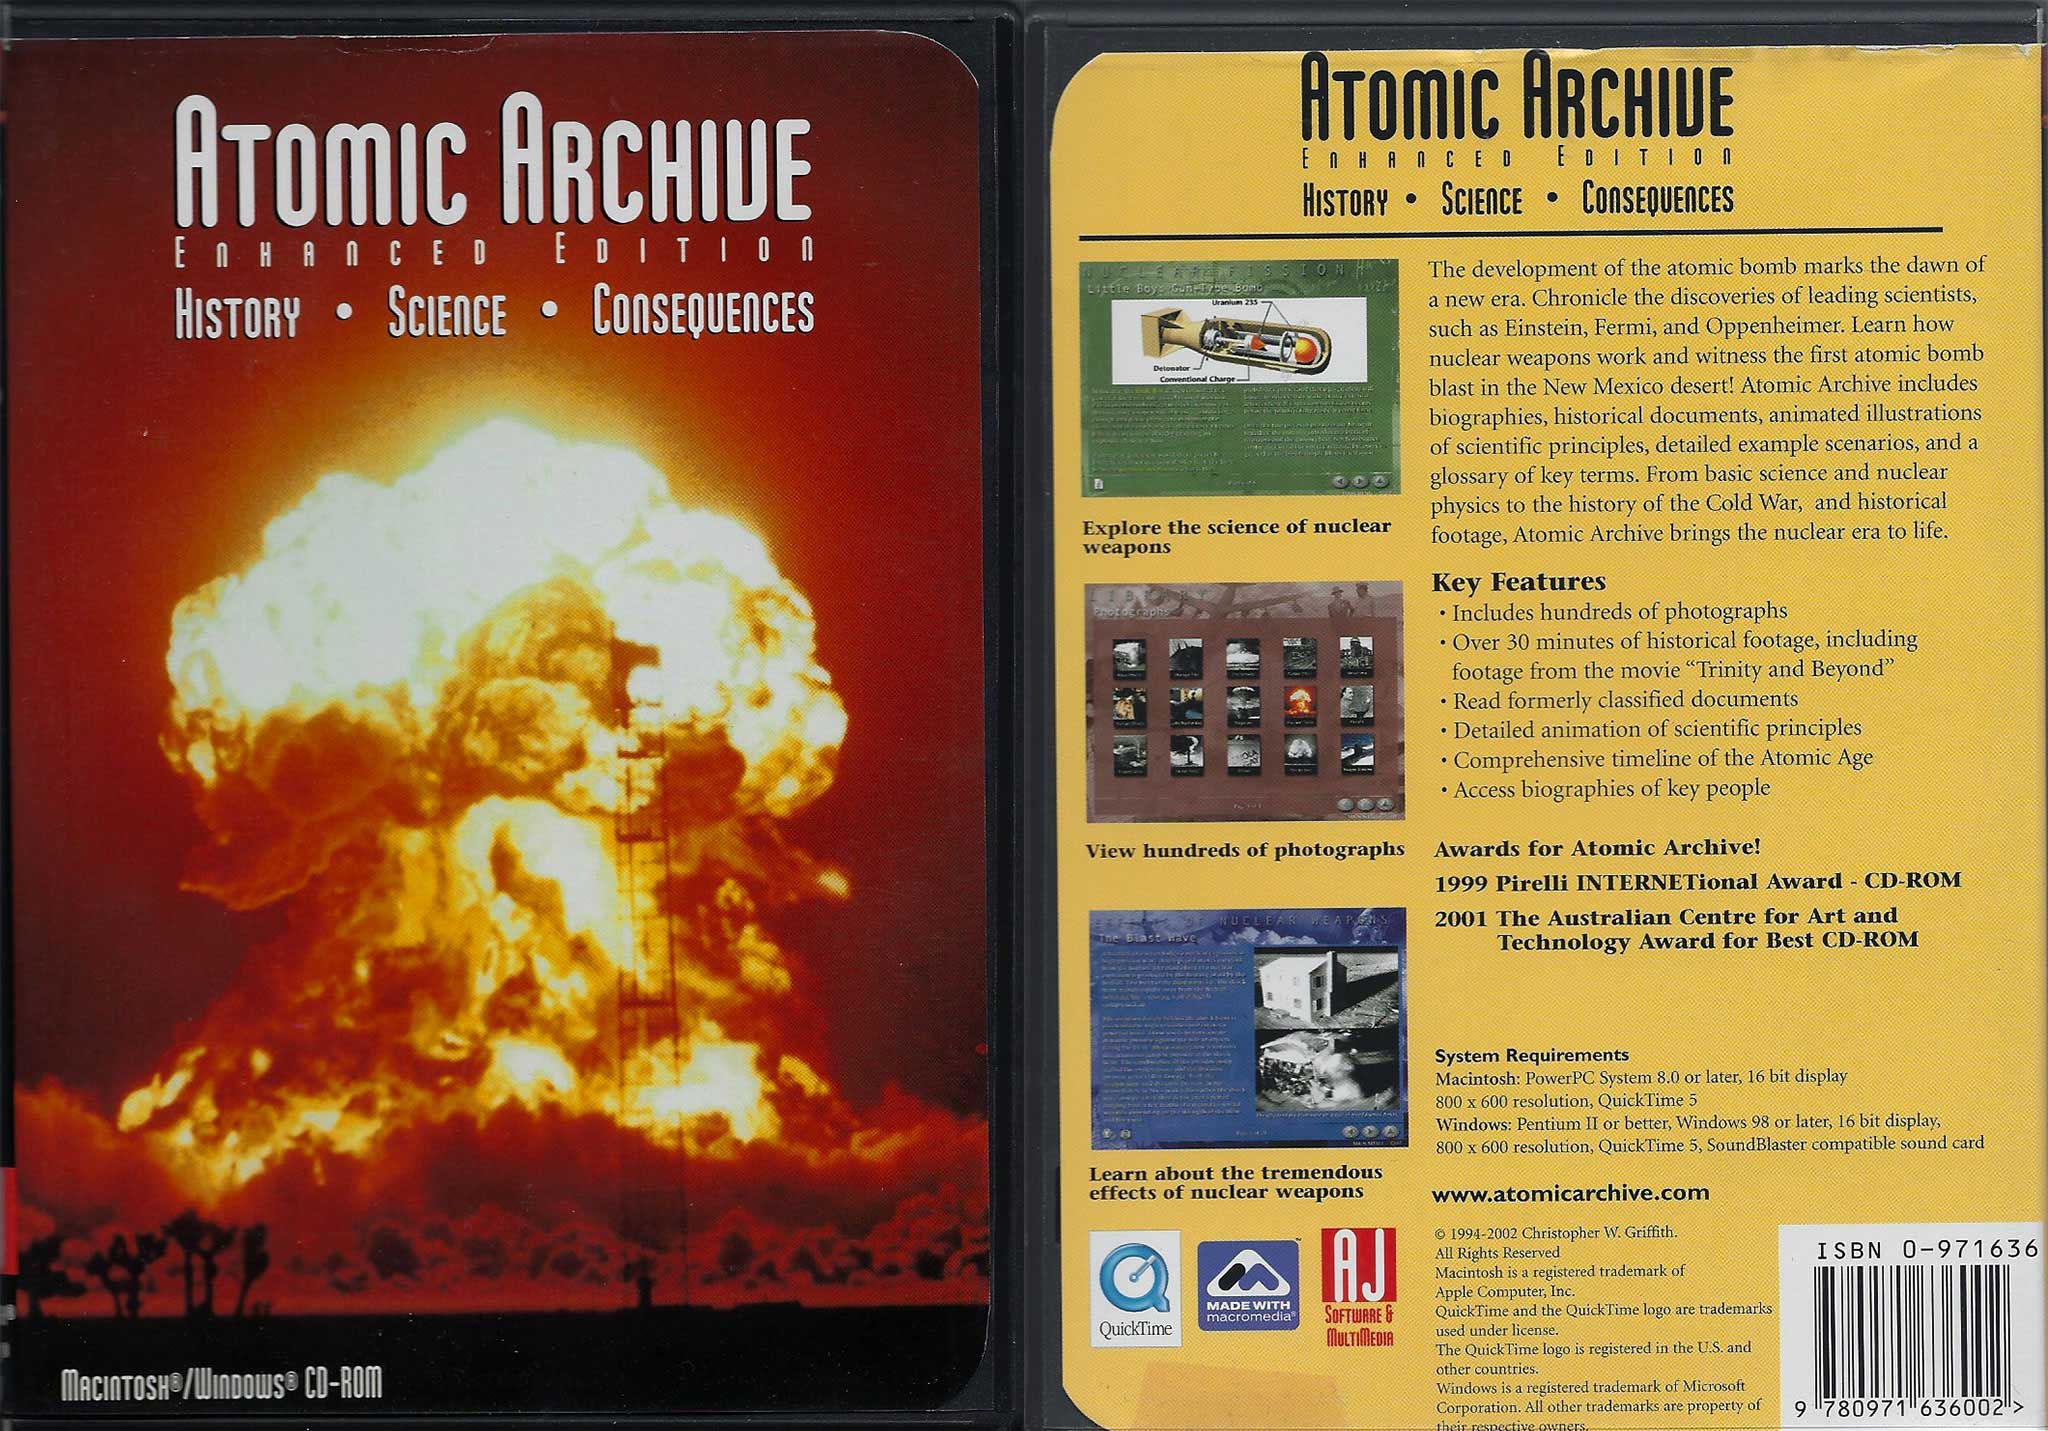 Atomic Archive: Enhanced Edition CD-ROM